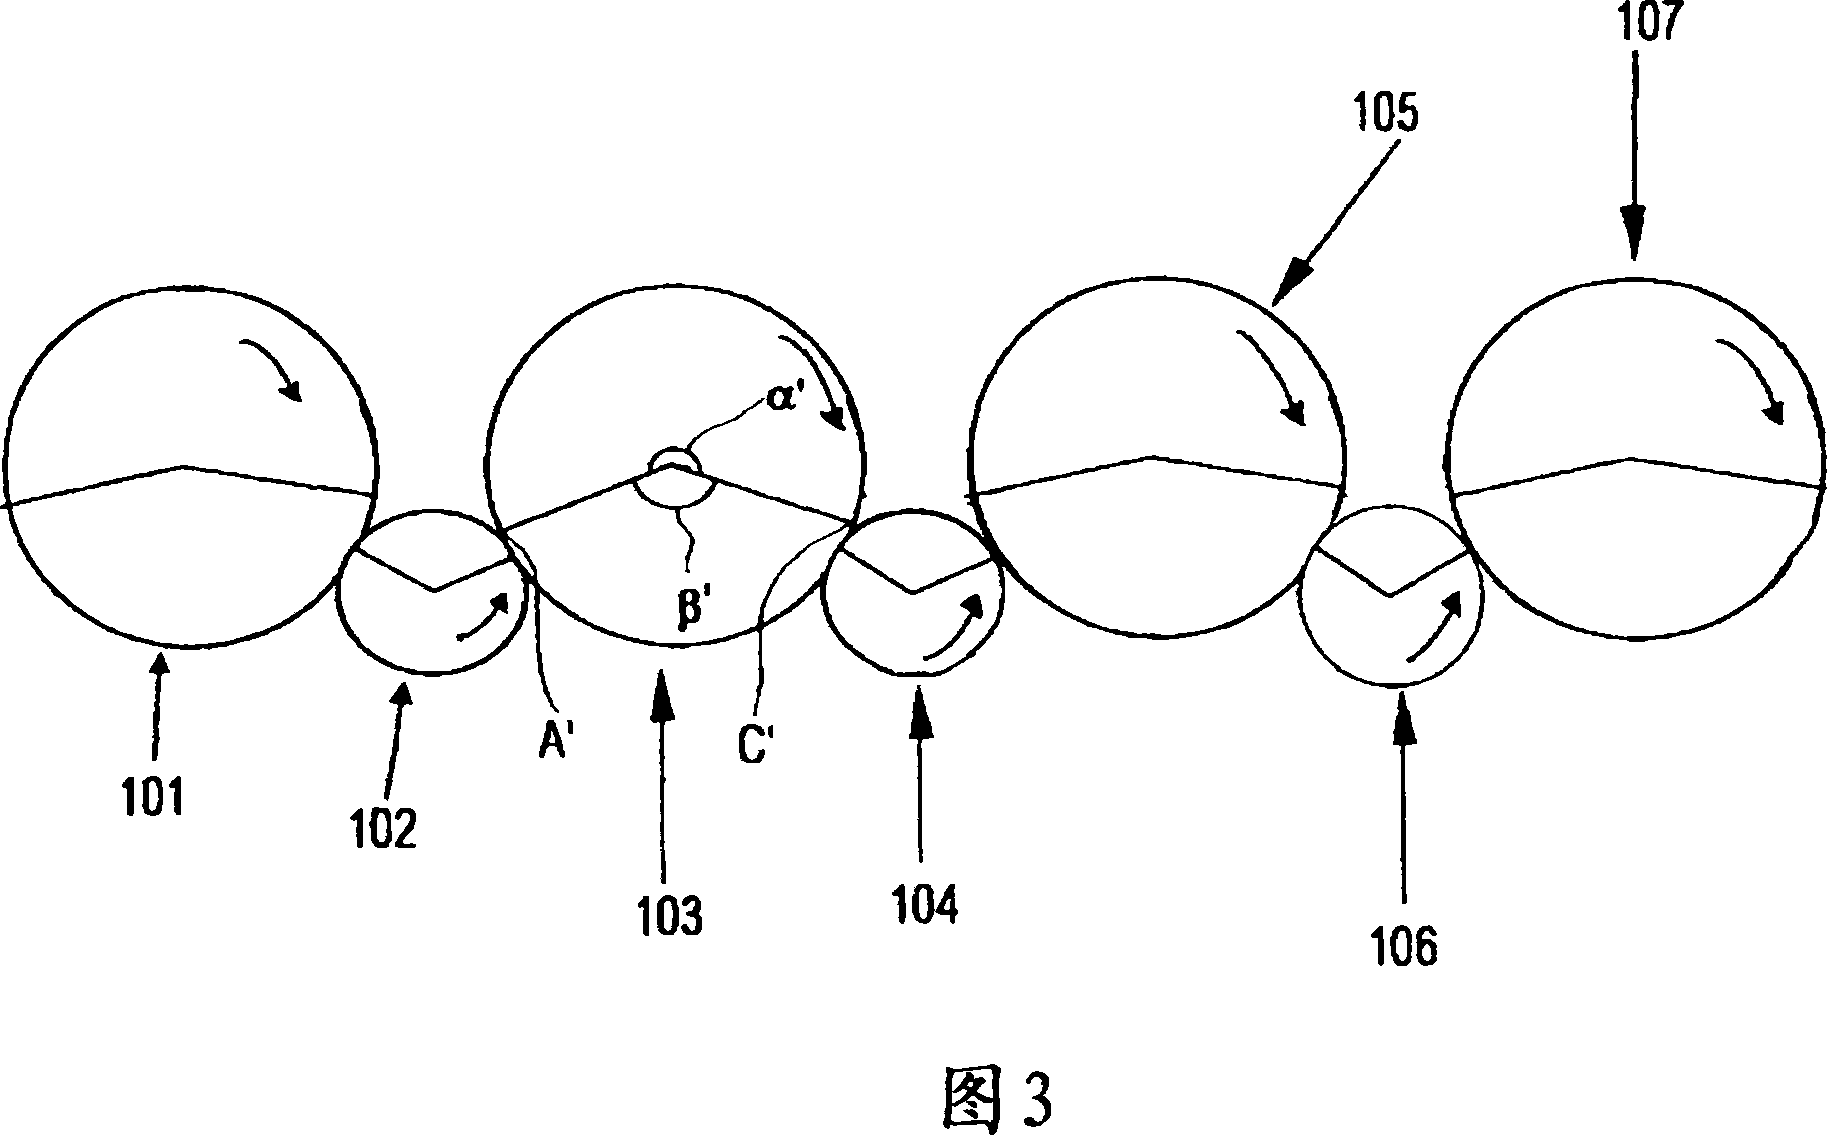 Apparatus and methods for treating components of packaging units, particularly bottles and/or caps